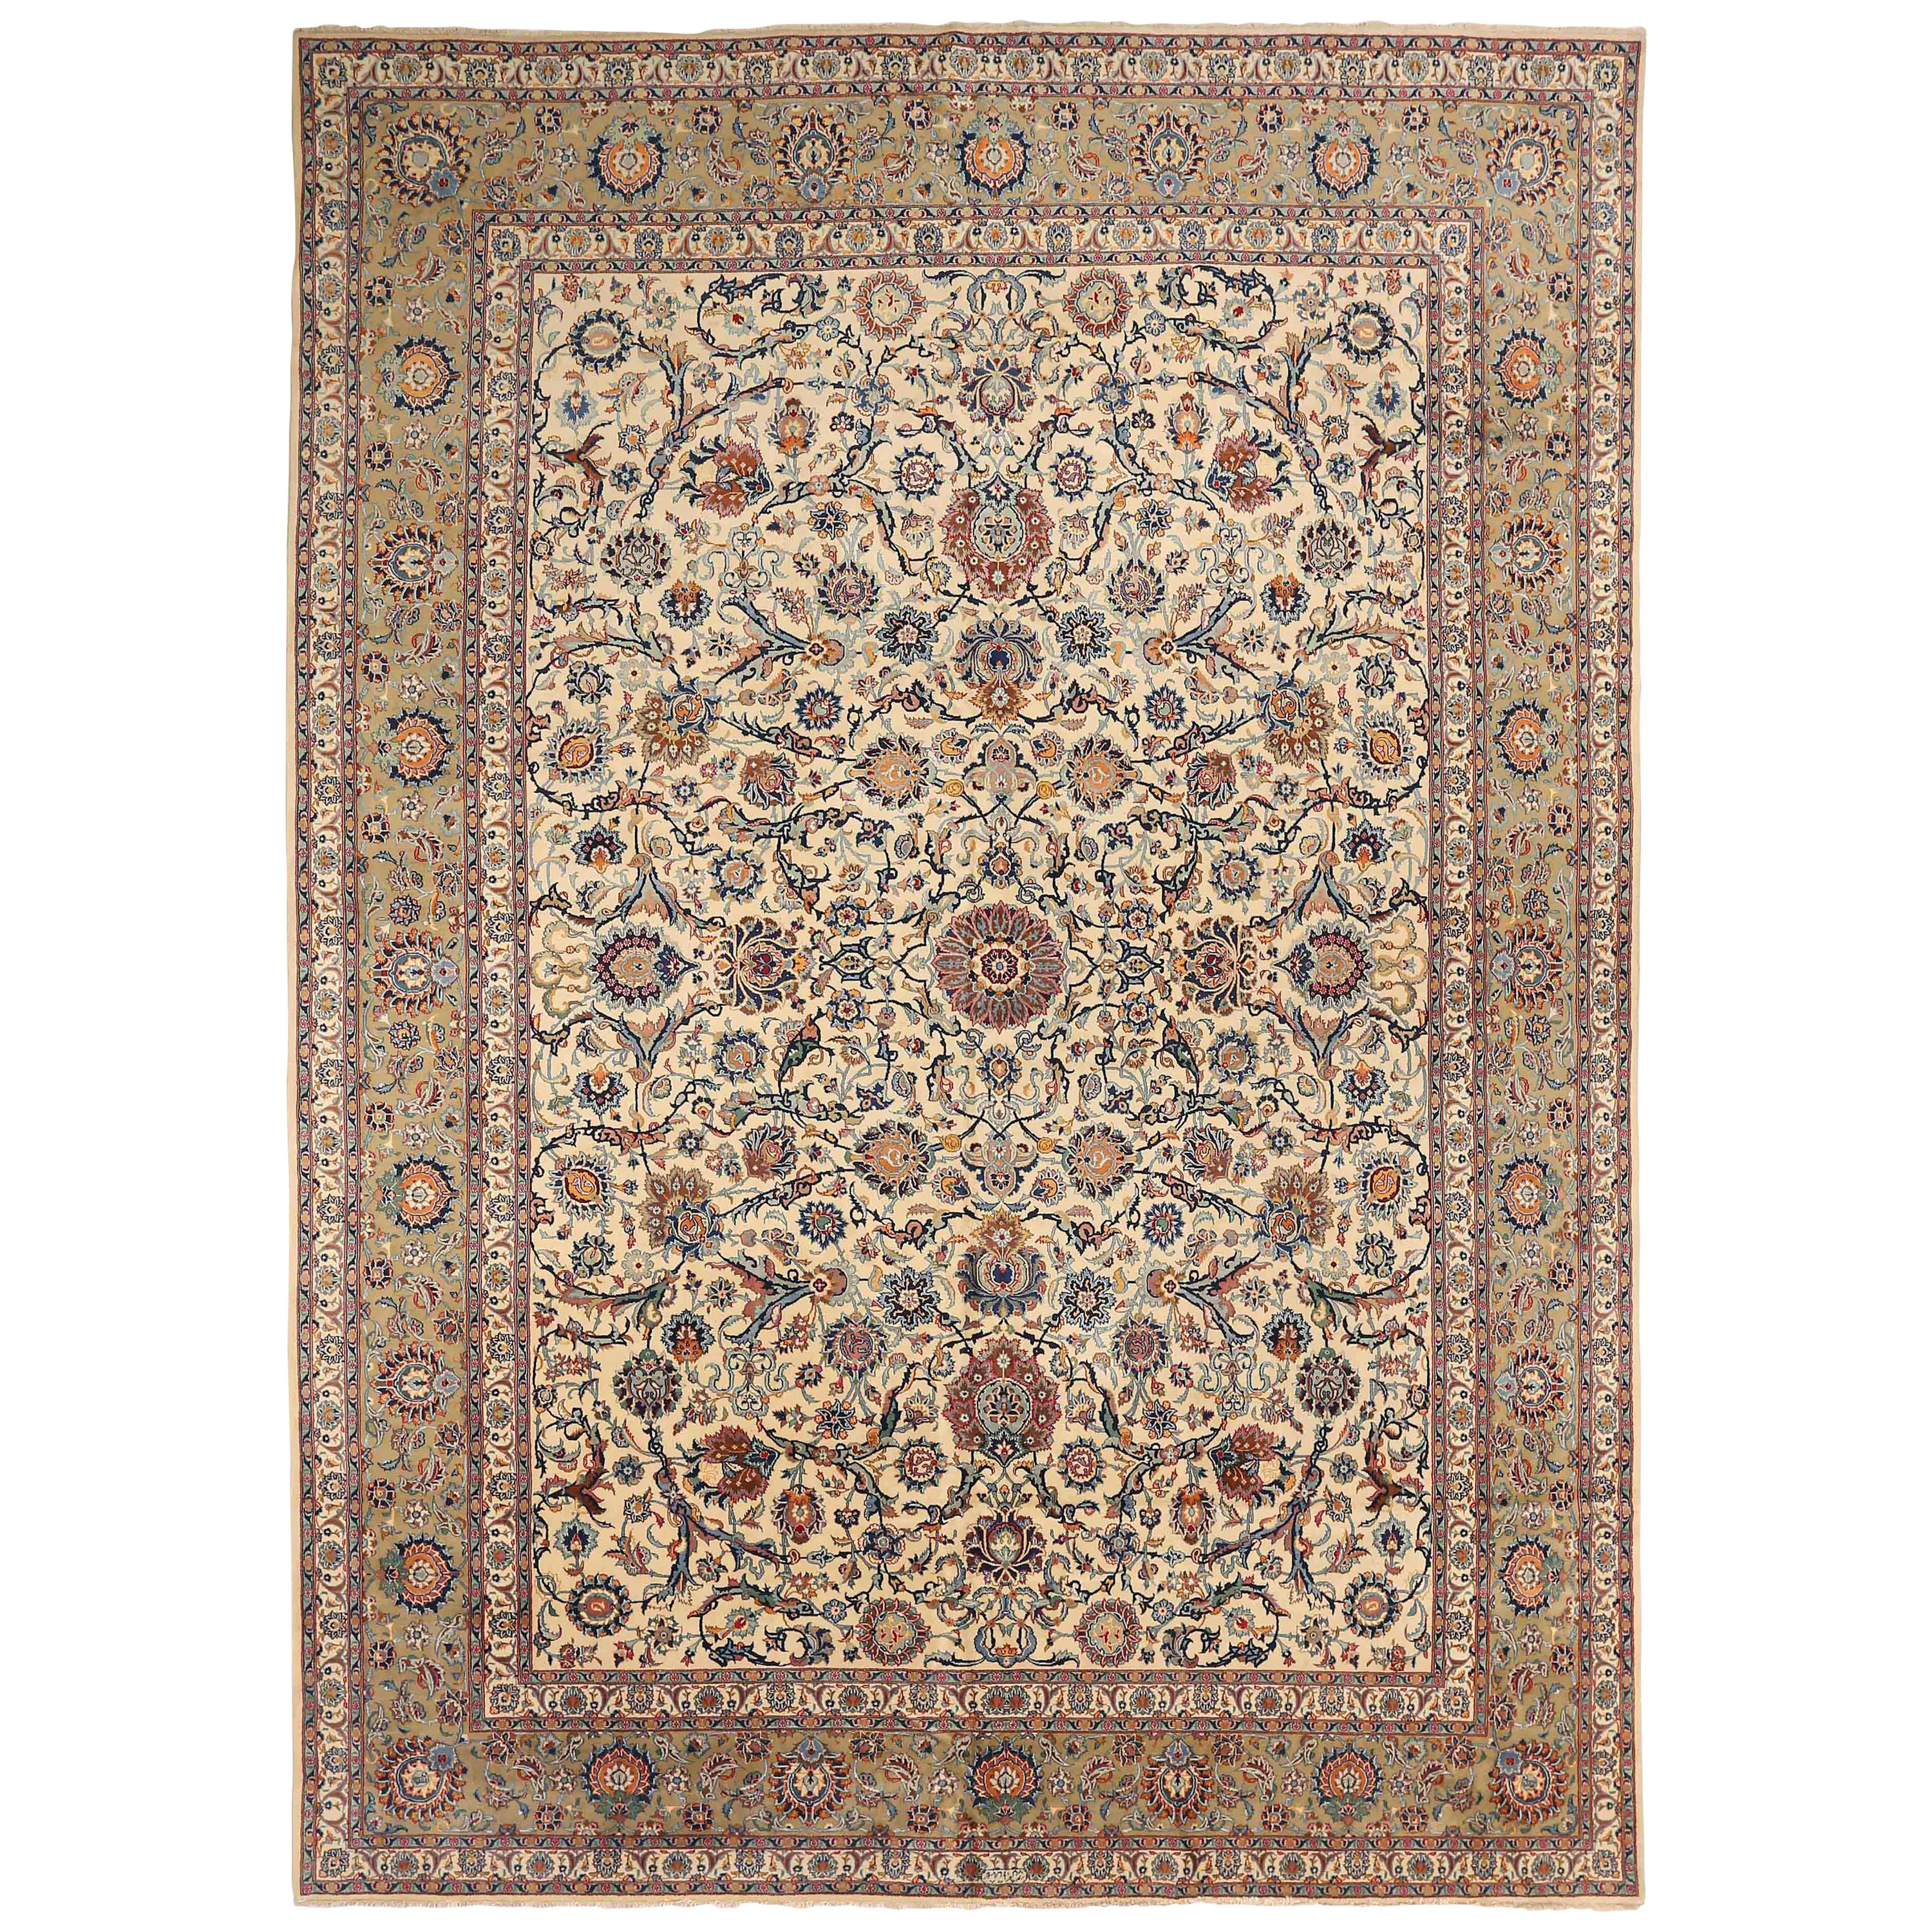 Antique Persian Kashan Rug with Floral Medallions on Ivory Field, circa 1970s